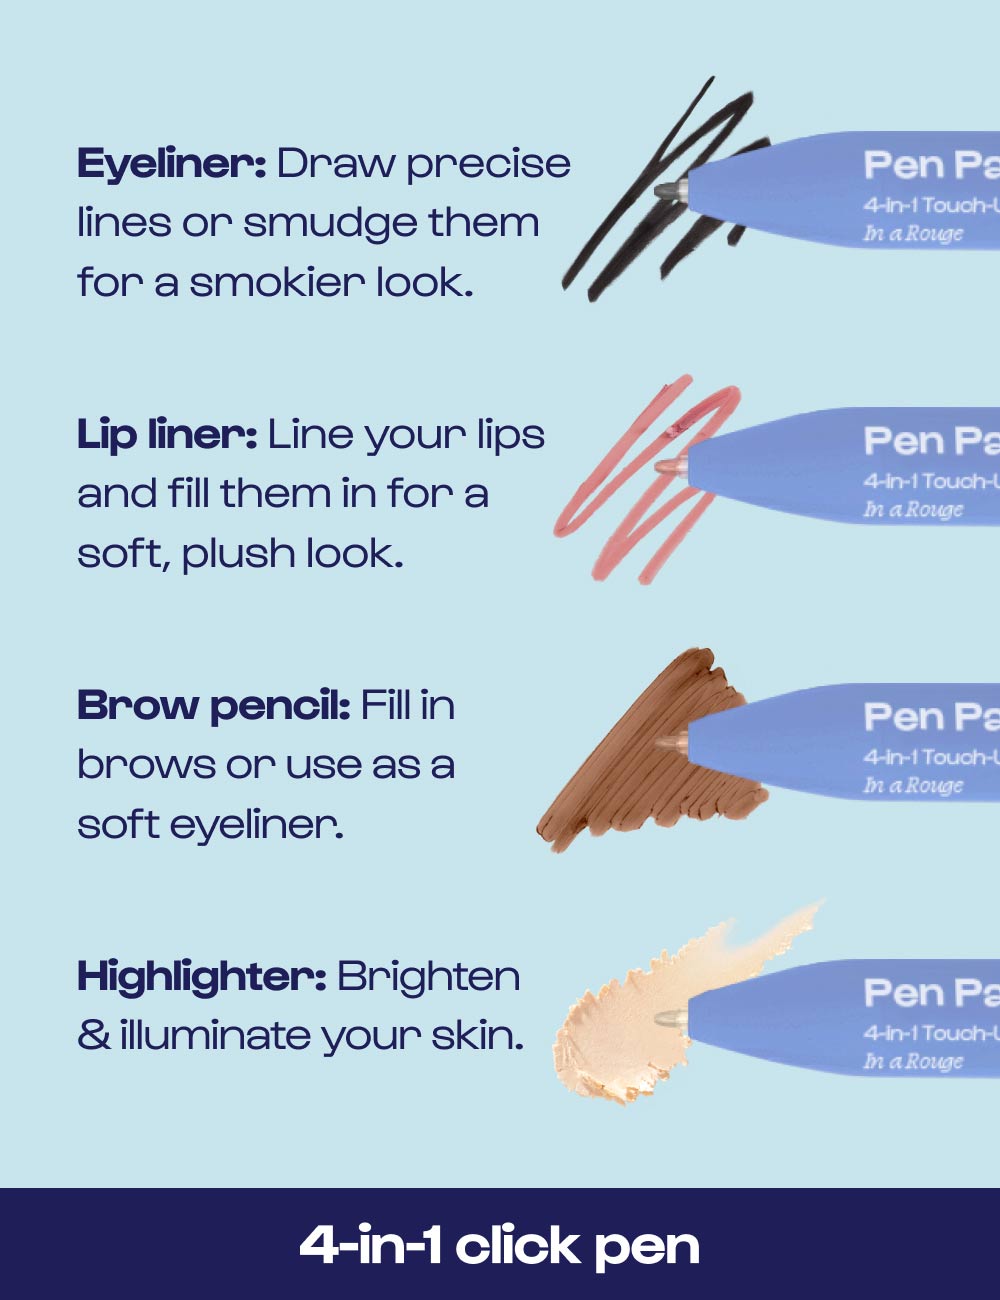 Pen Pal All-IN-One Makeup